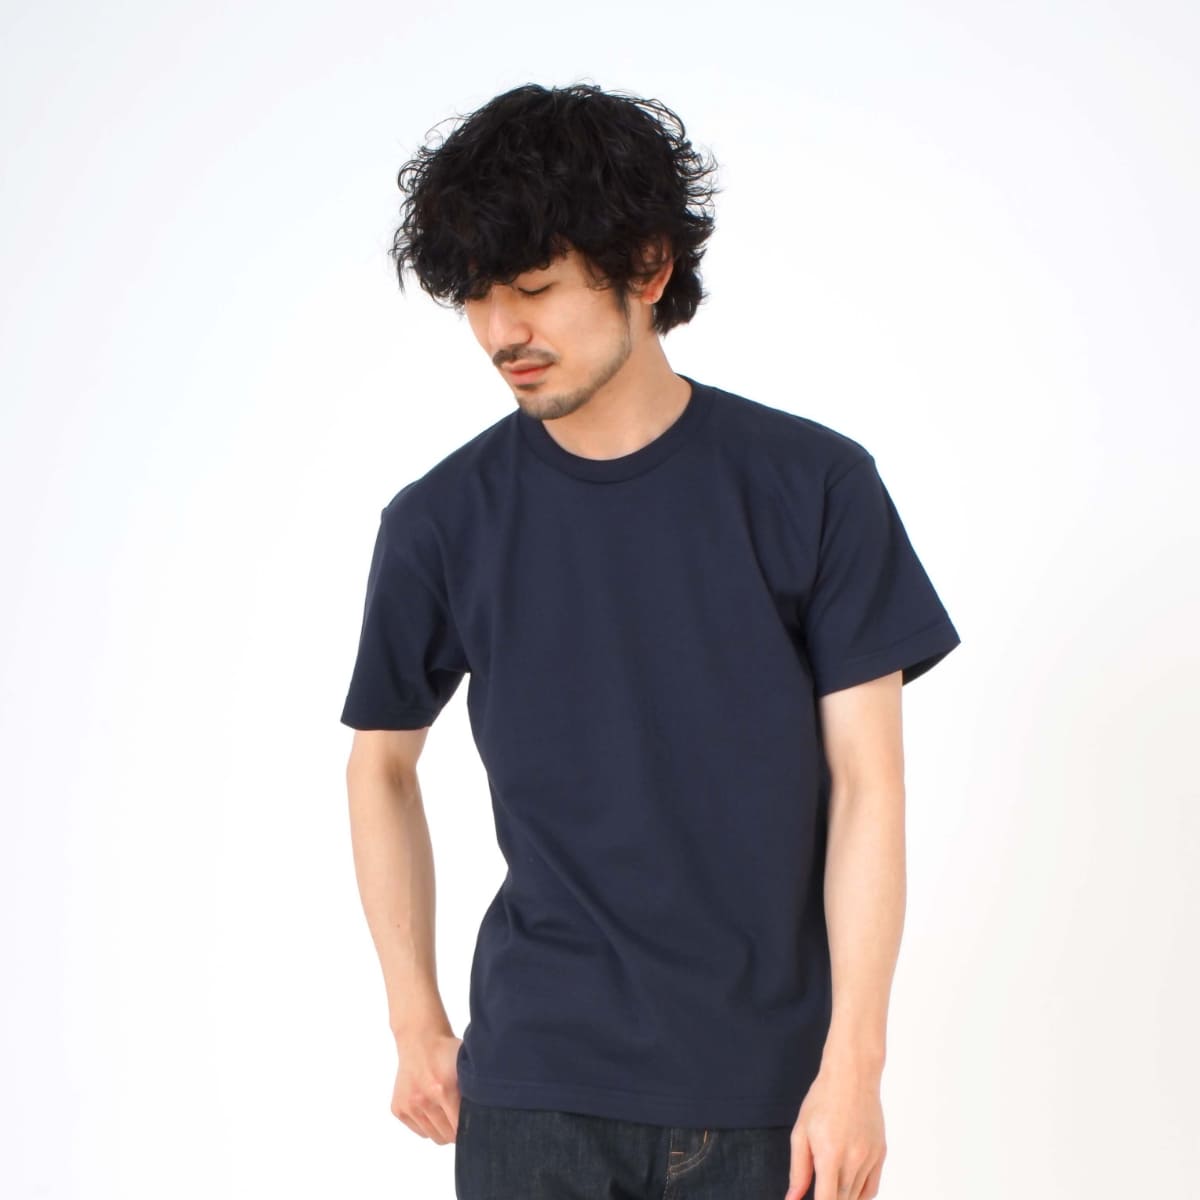 Touch and Go Ｔシャツ | メンズ | 1枚 | SS1030 | ピンク